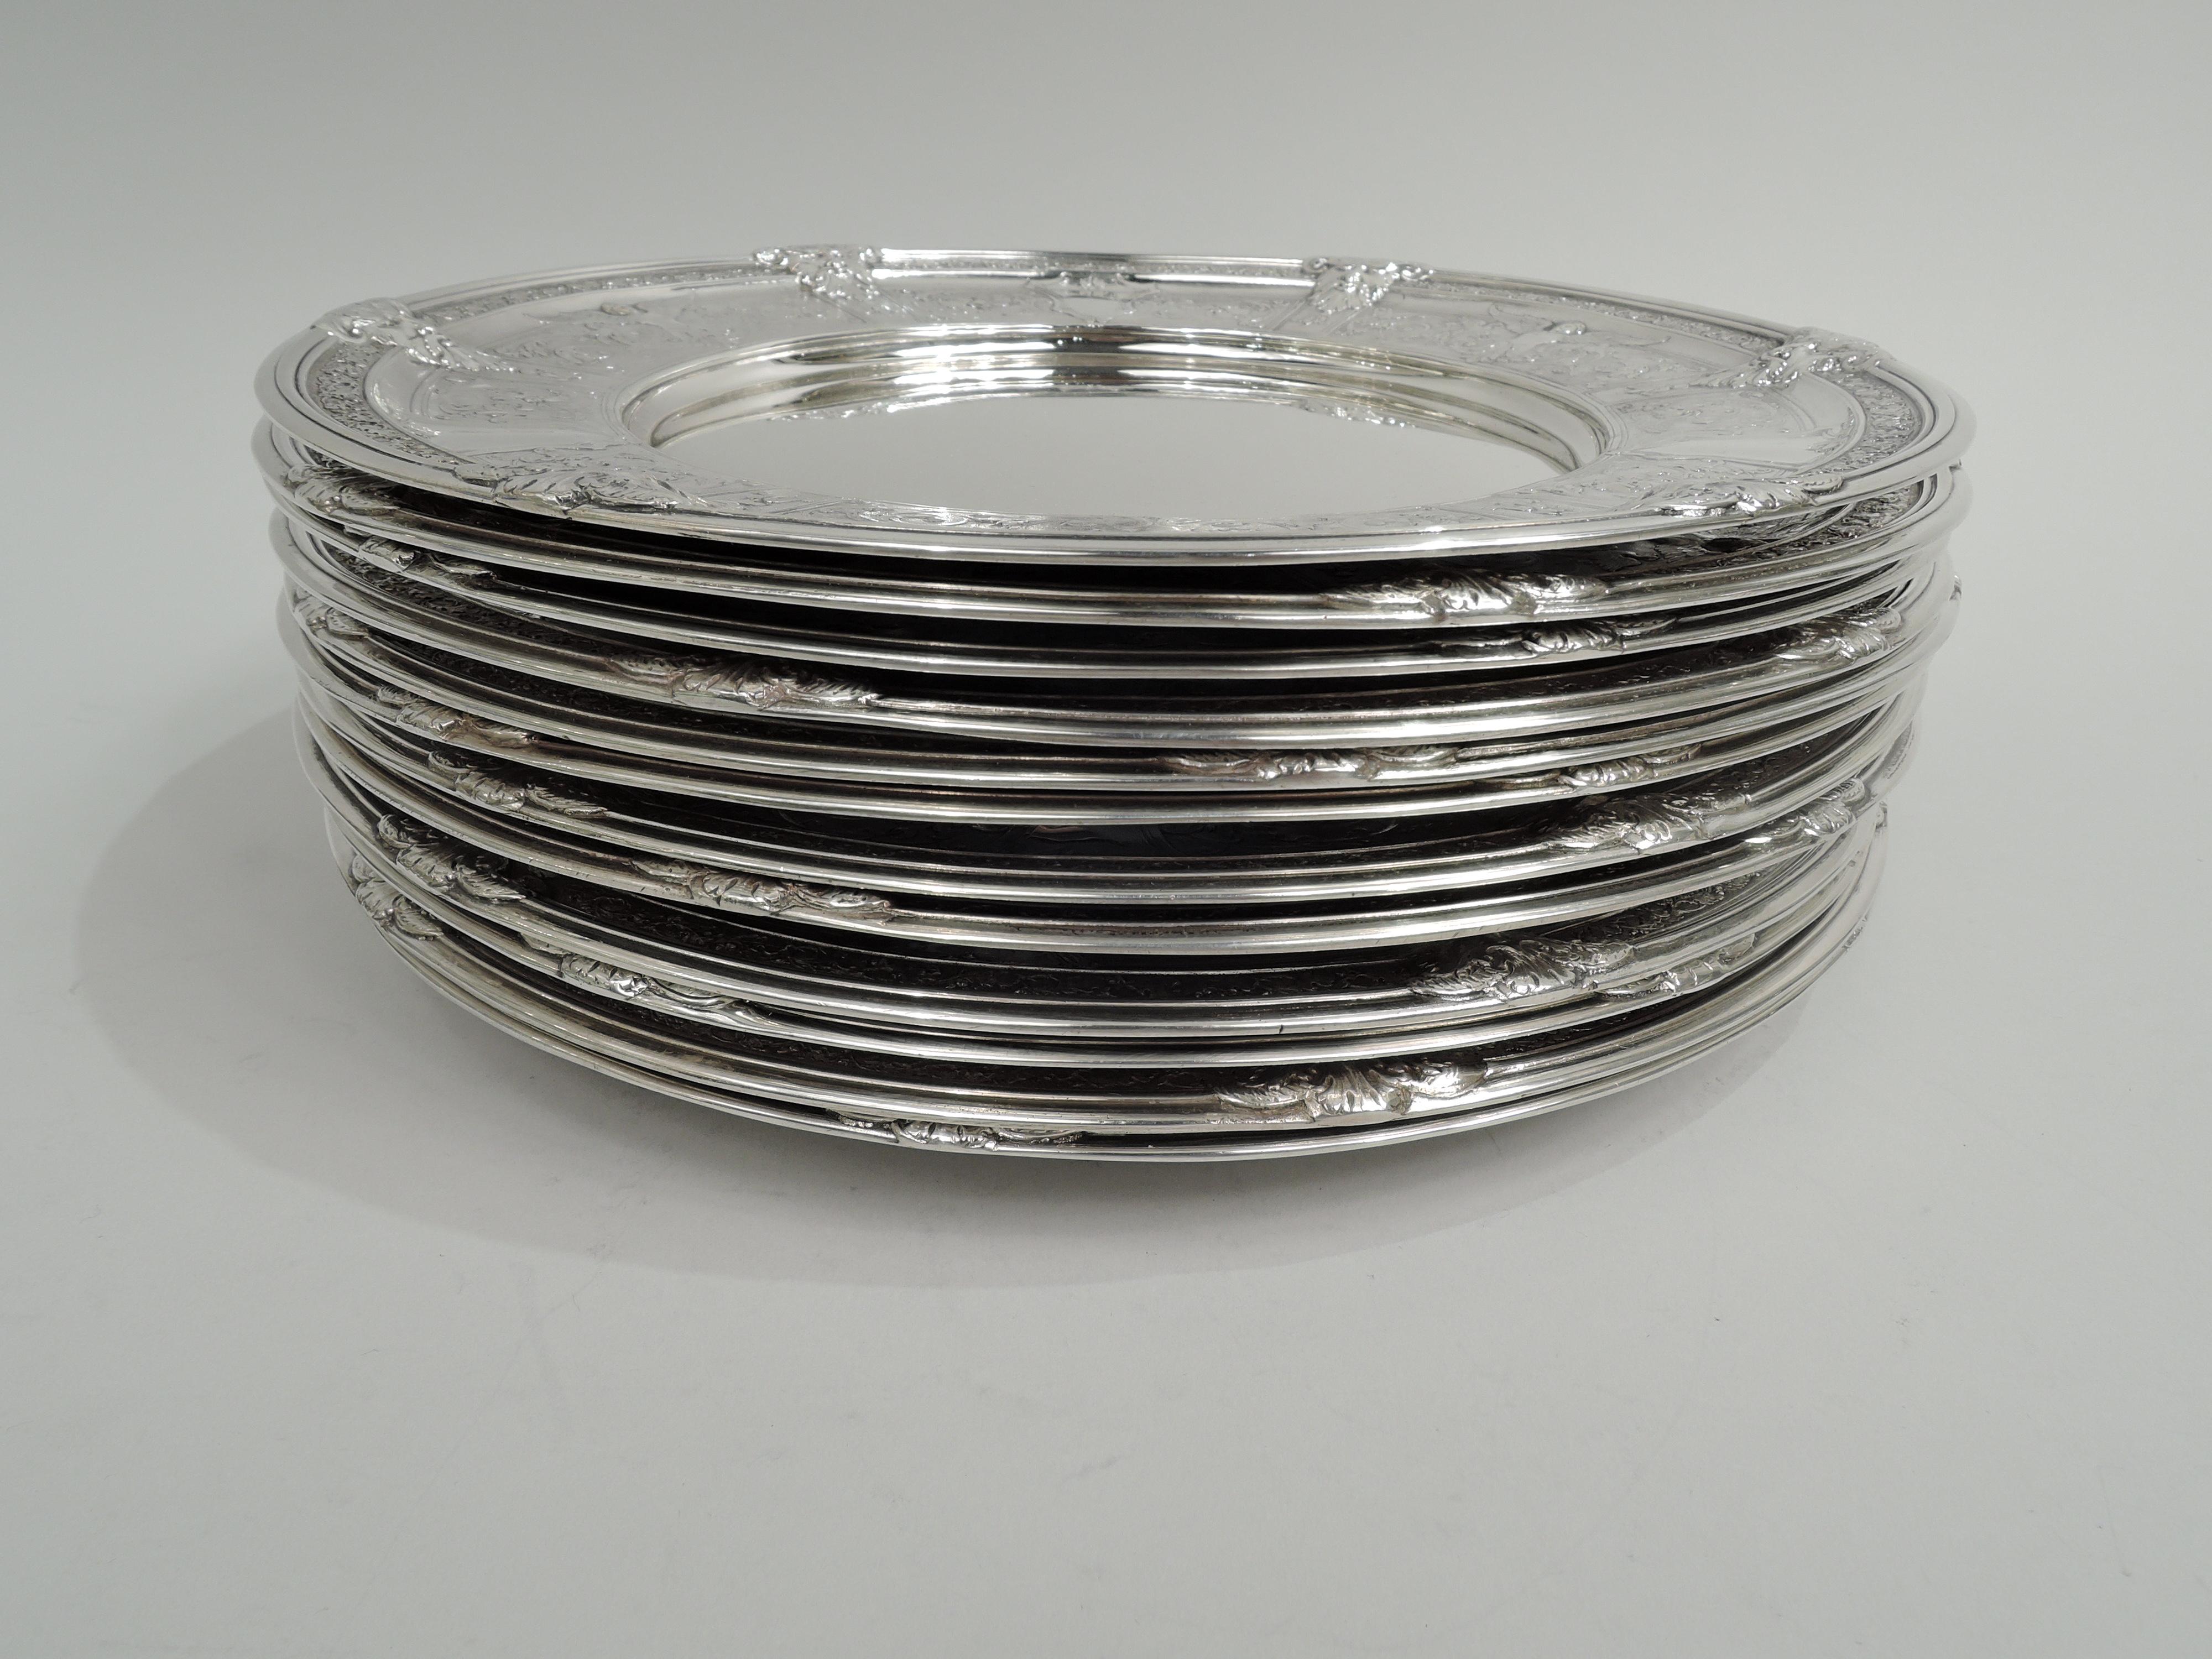 Set of 12 Florenz sterling silver dinner plates. Made by Gorham in Providence, 1926-9.
Each: round and plain well. Shoulder has rectilinear frames inset with chased Quattrocento ornament including griffins and foliate scrolls as well as armorial